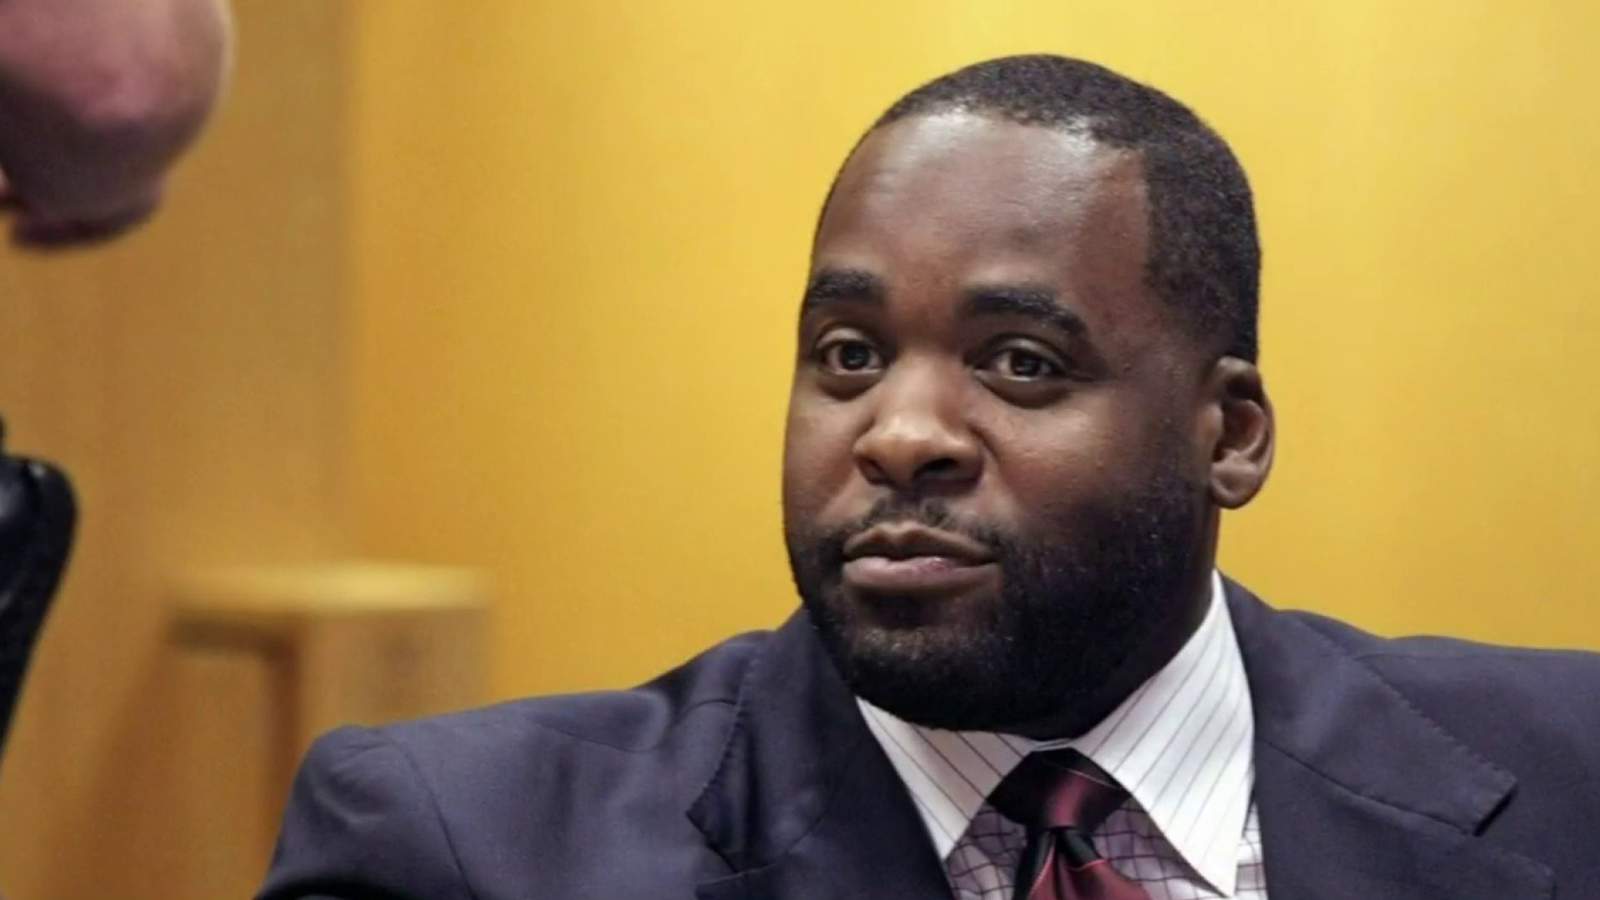 Trump commutes sentence of ex-Detroit Mayor Kwame Kilpatrick after 7 years in prison